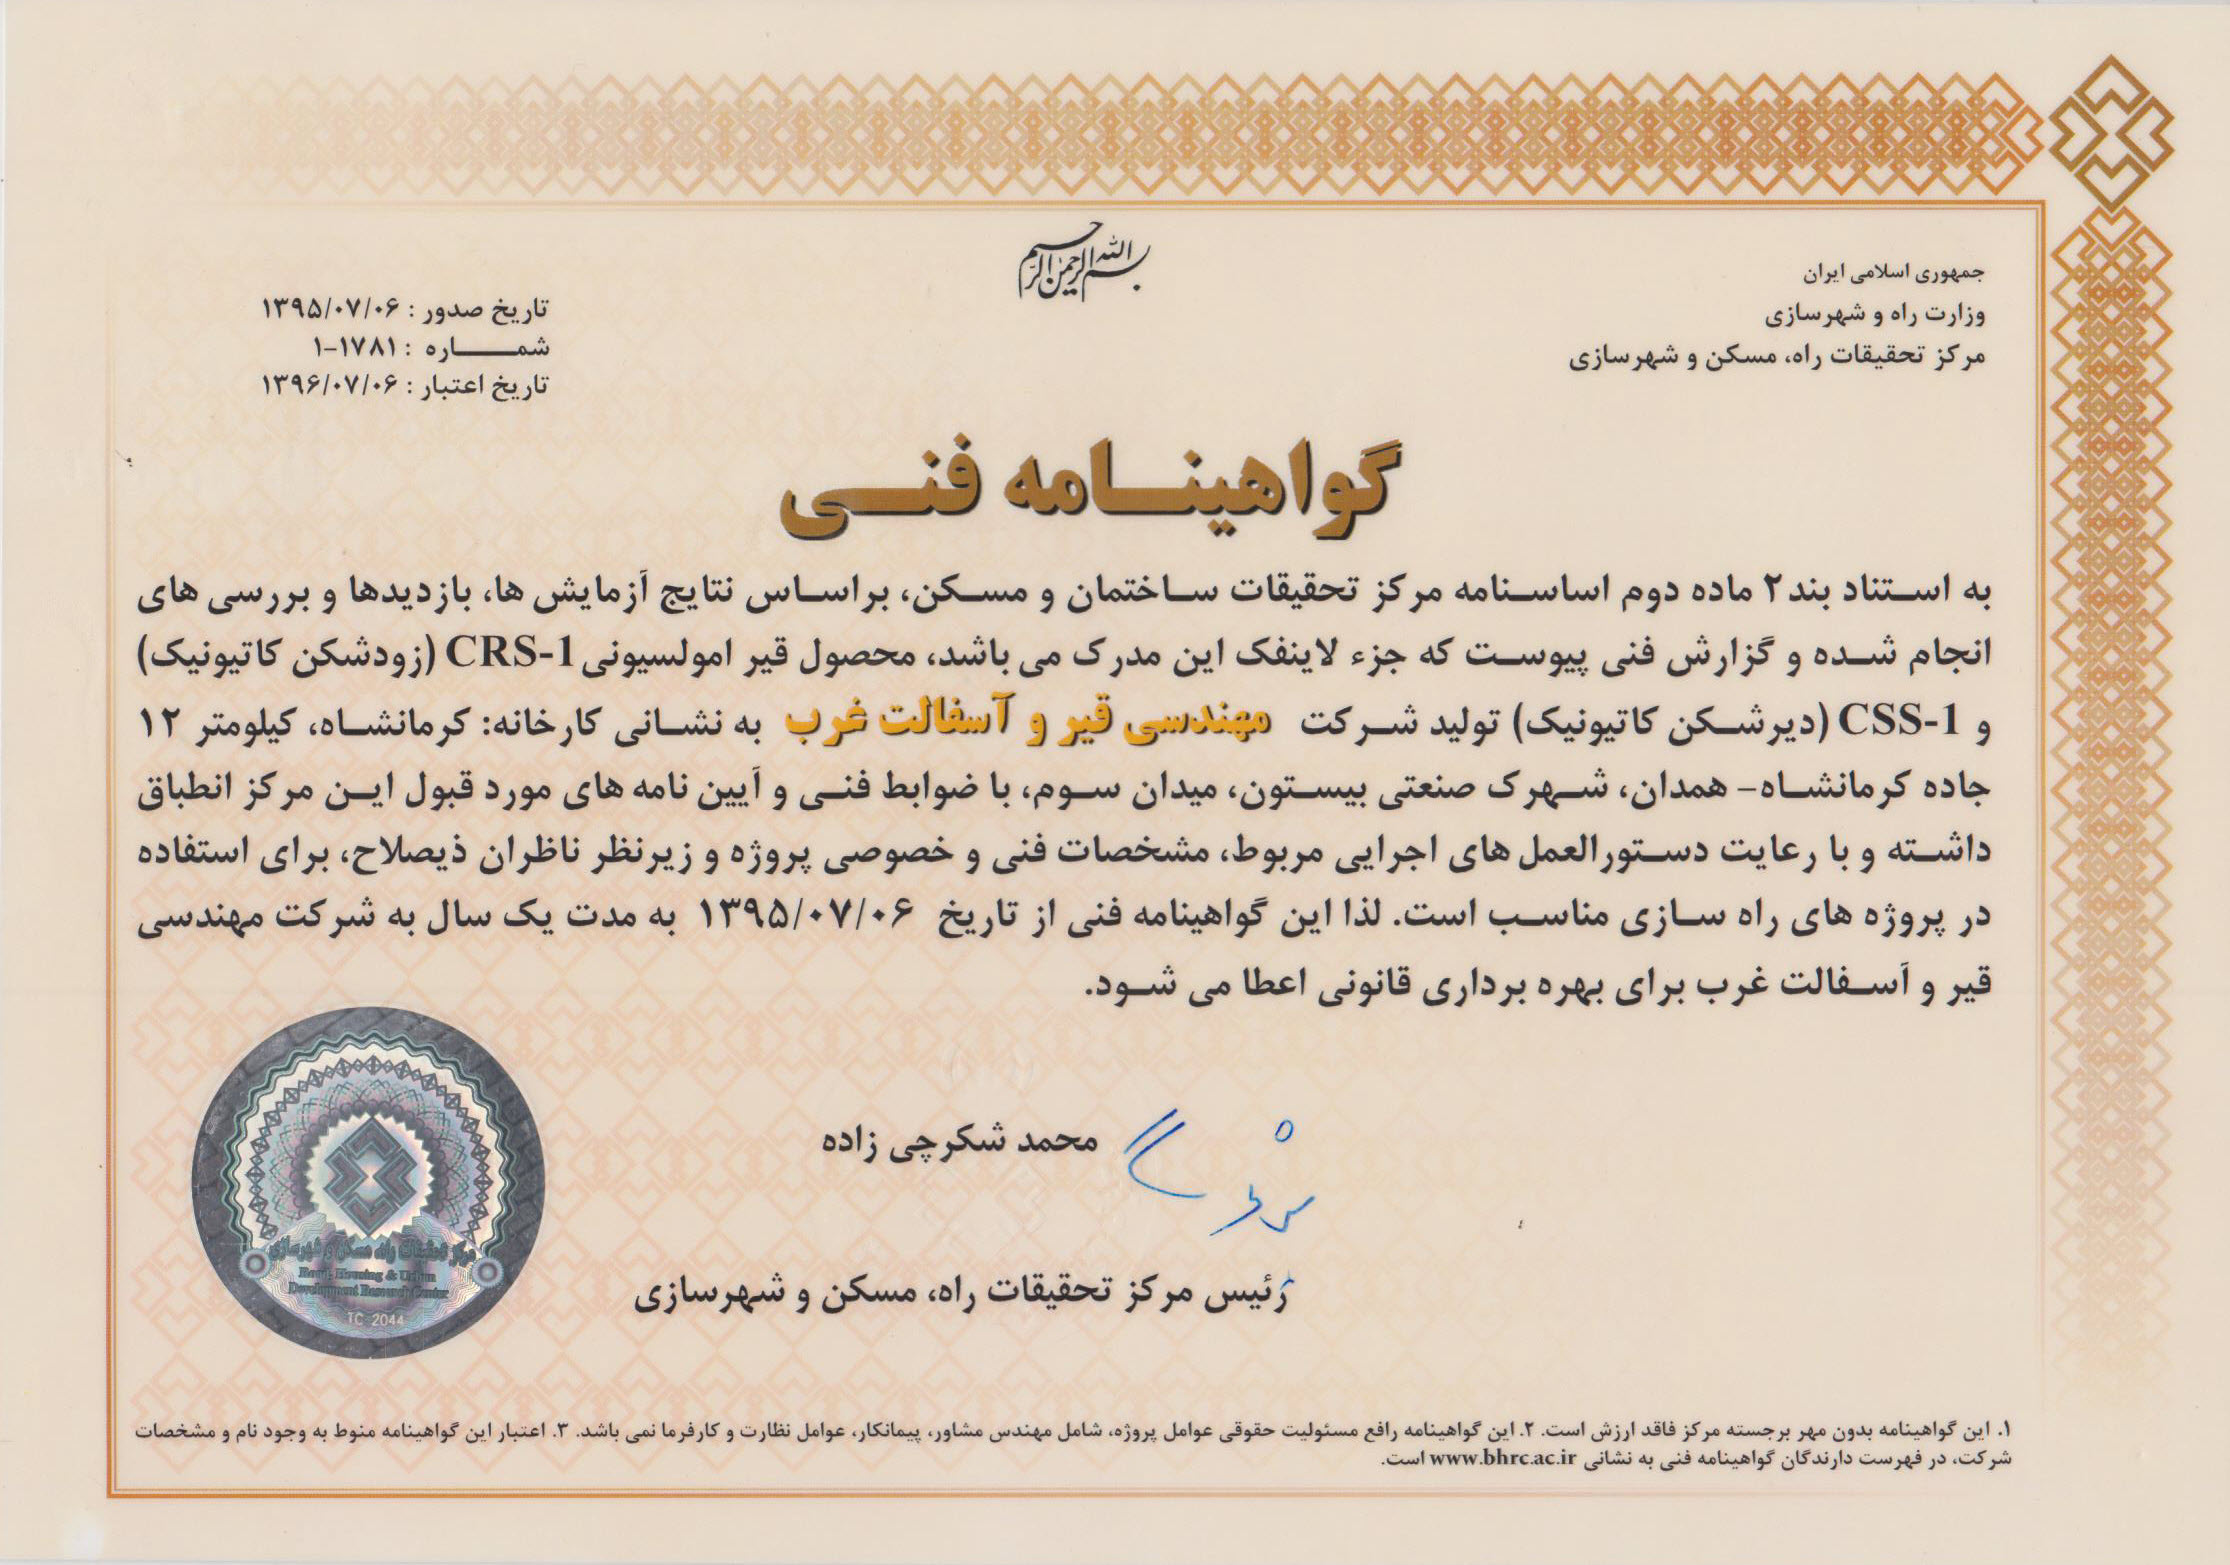 Technical Certificate of Road, Housing and Development Research Center